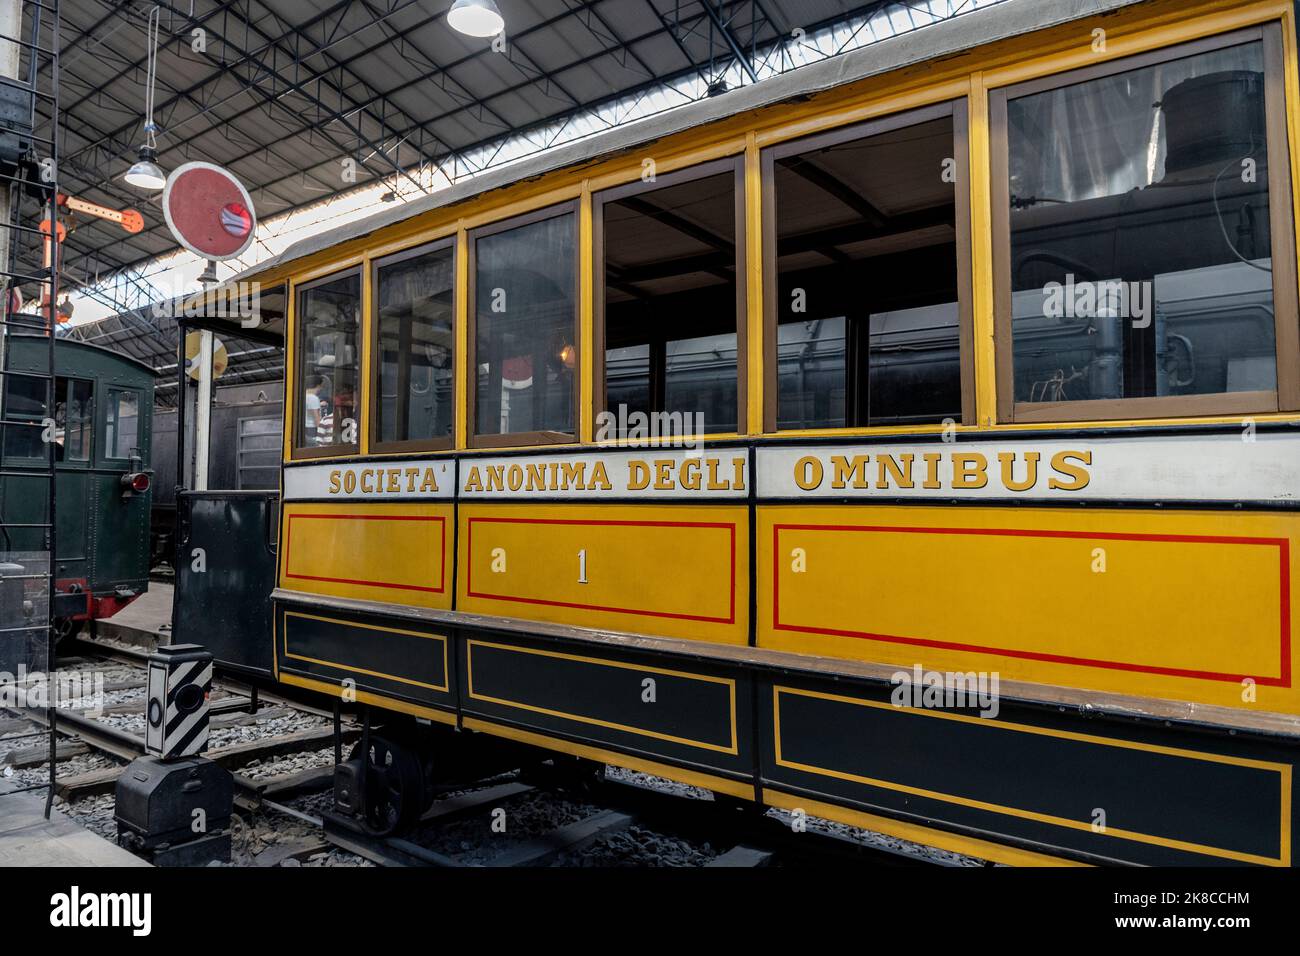 Transport section with omnibus, locomotives and trains in National Museum of Science and Technology, Milan city center, Lombardy region, Italy Stock Photo